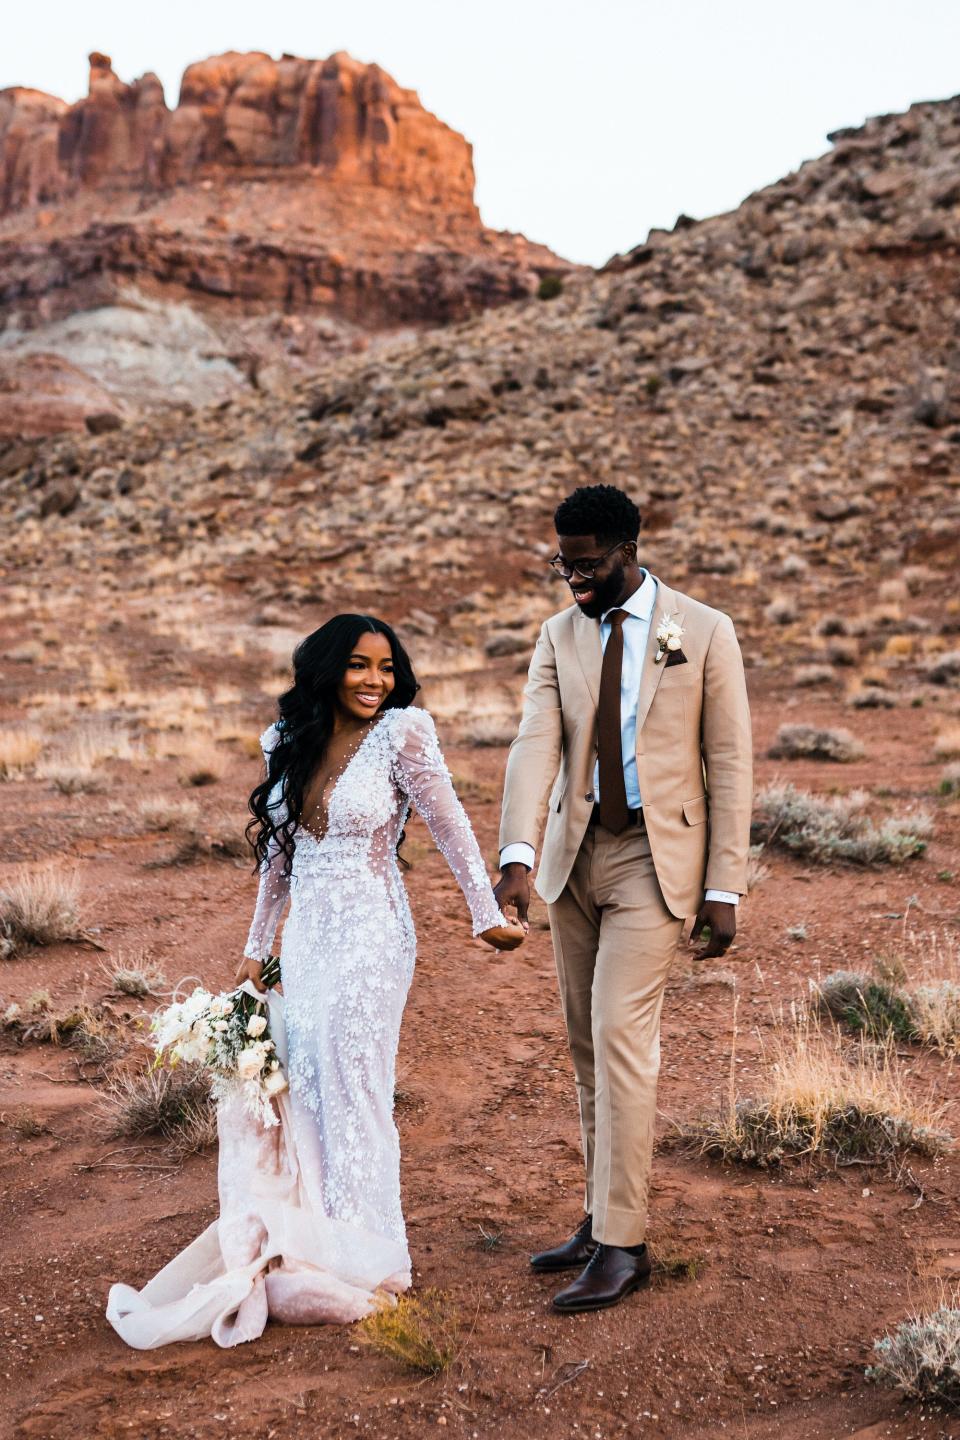 A bride and groom smile in their wedding attire in a desert.